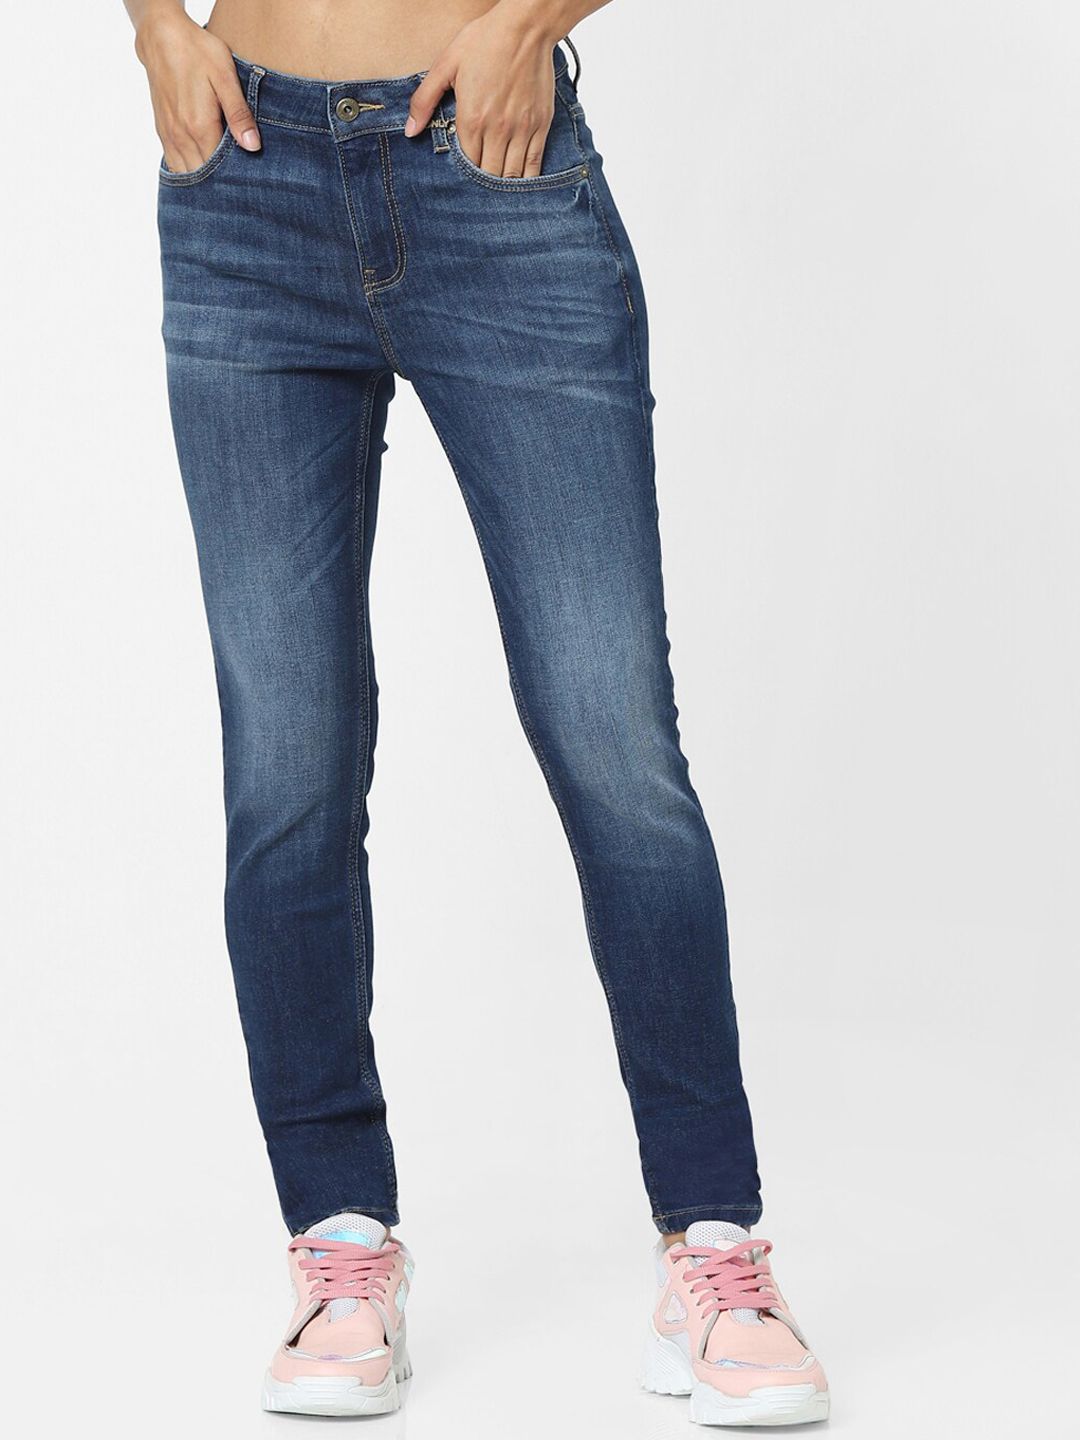 ONLY Women Blue Slim Fit Light Fade Jeans Price in India